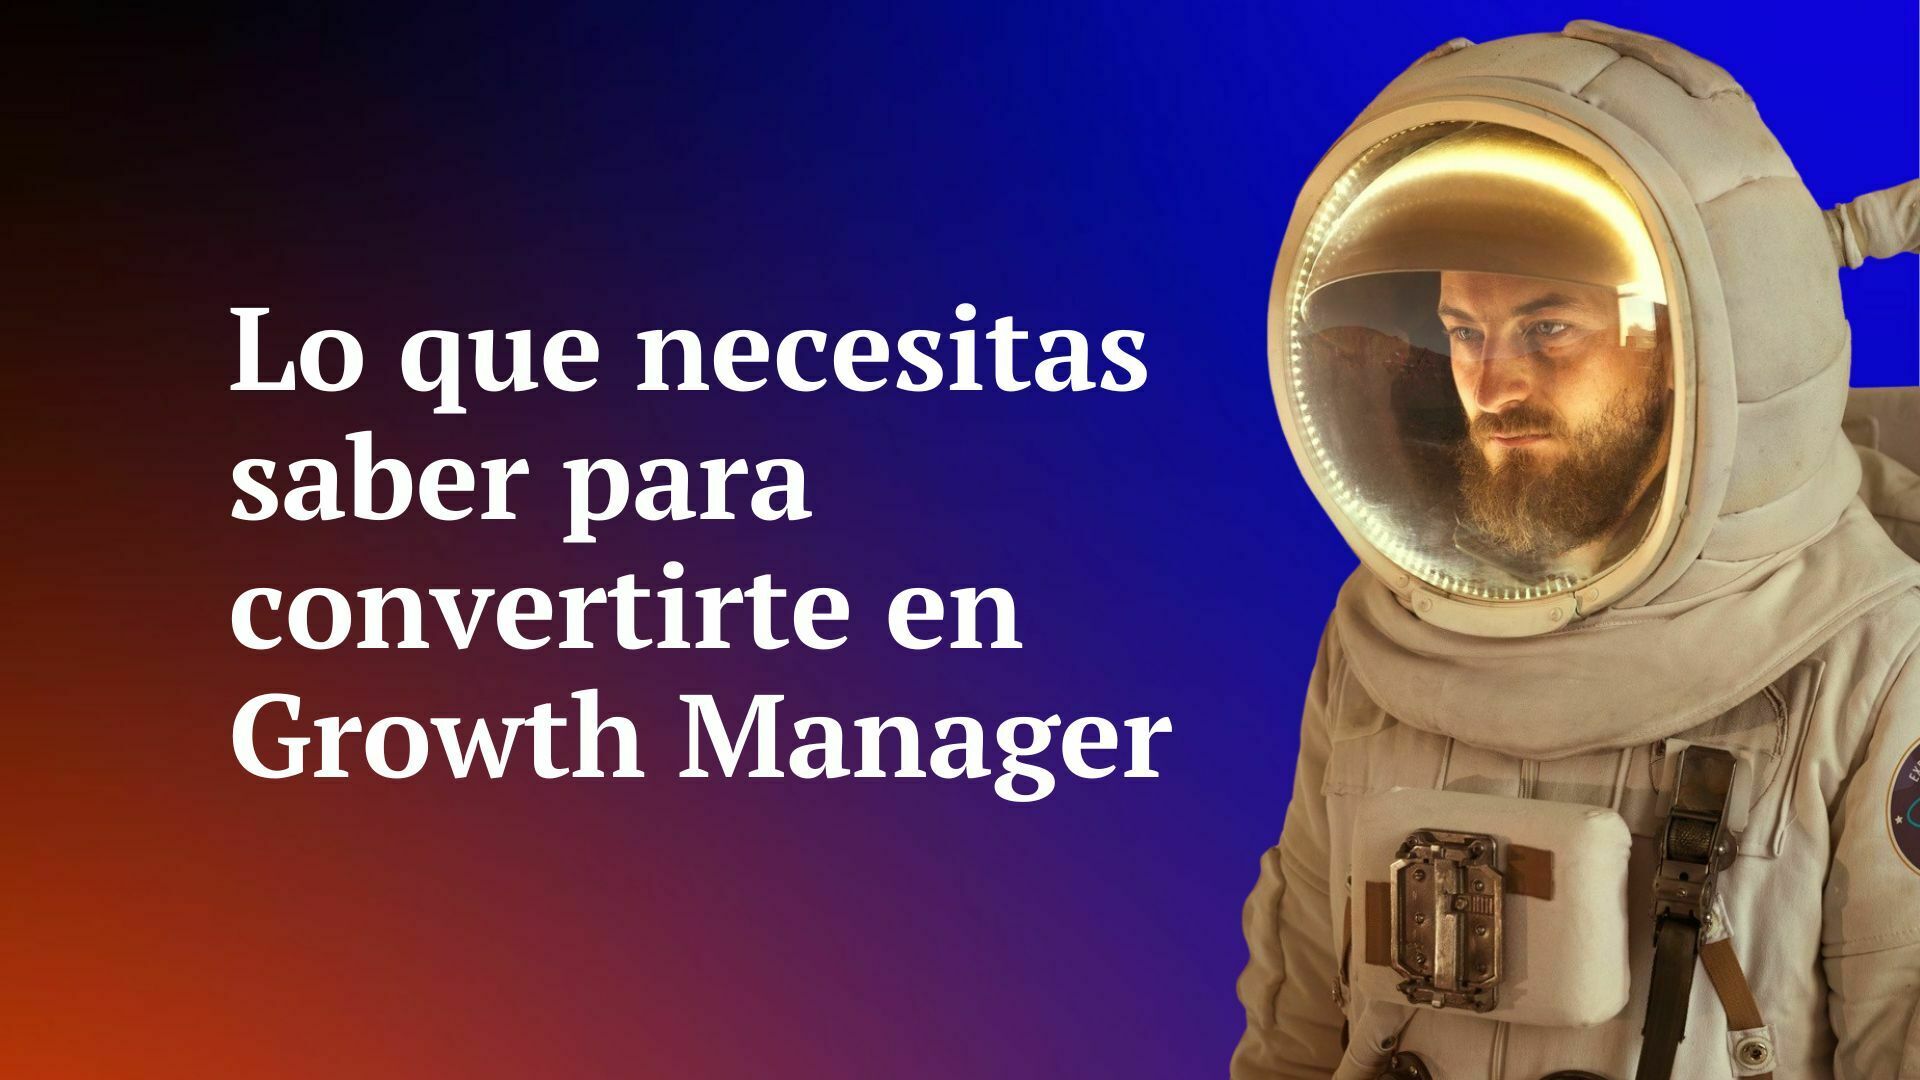 Growth Hacker Growth Manager